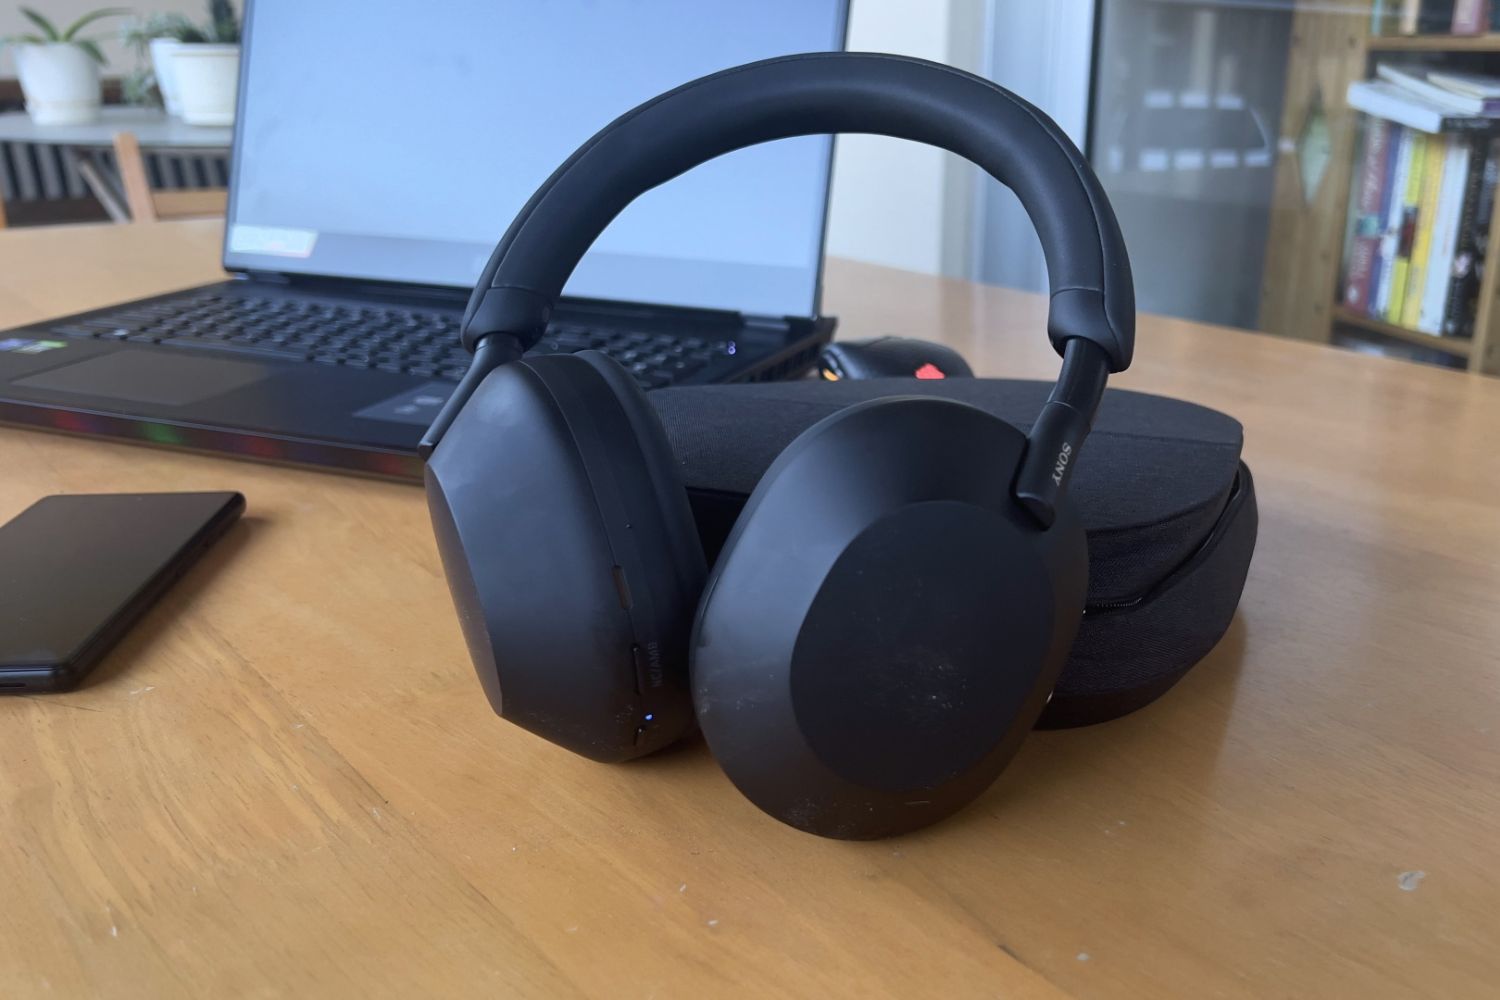 sony-wireless-noise-cancelling-headphones-how-to-sync-to-computer